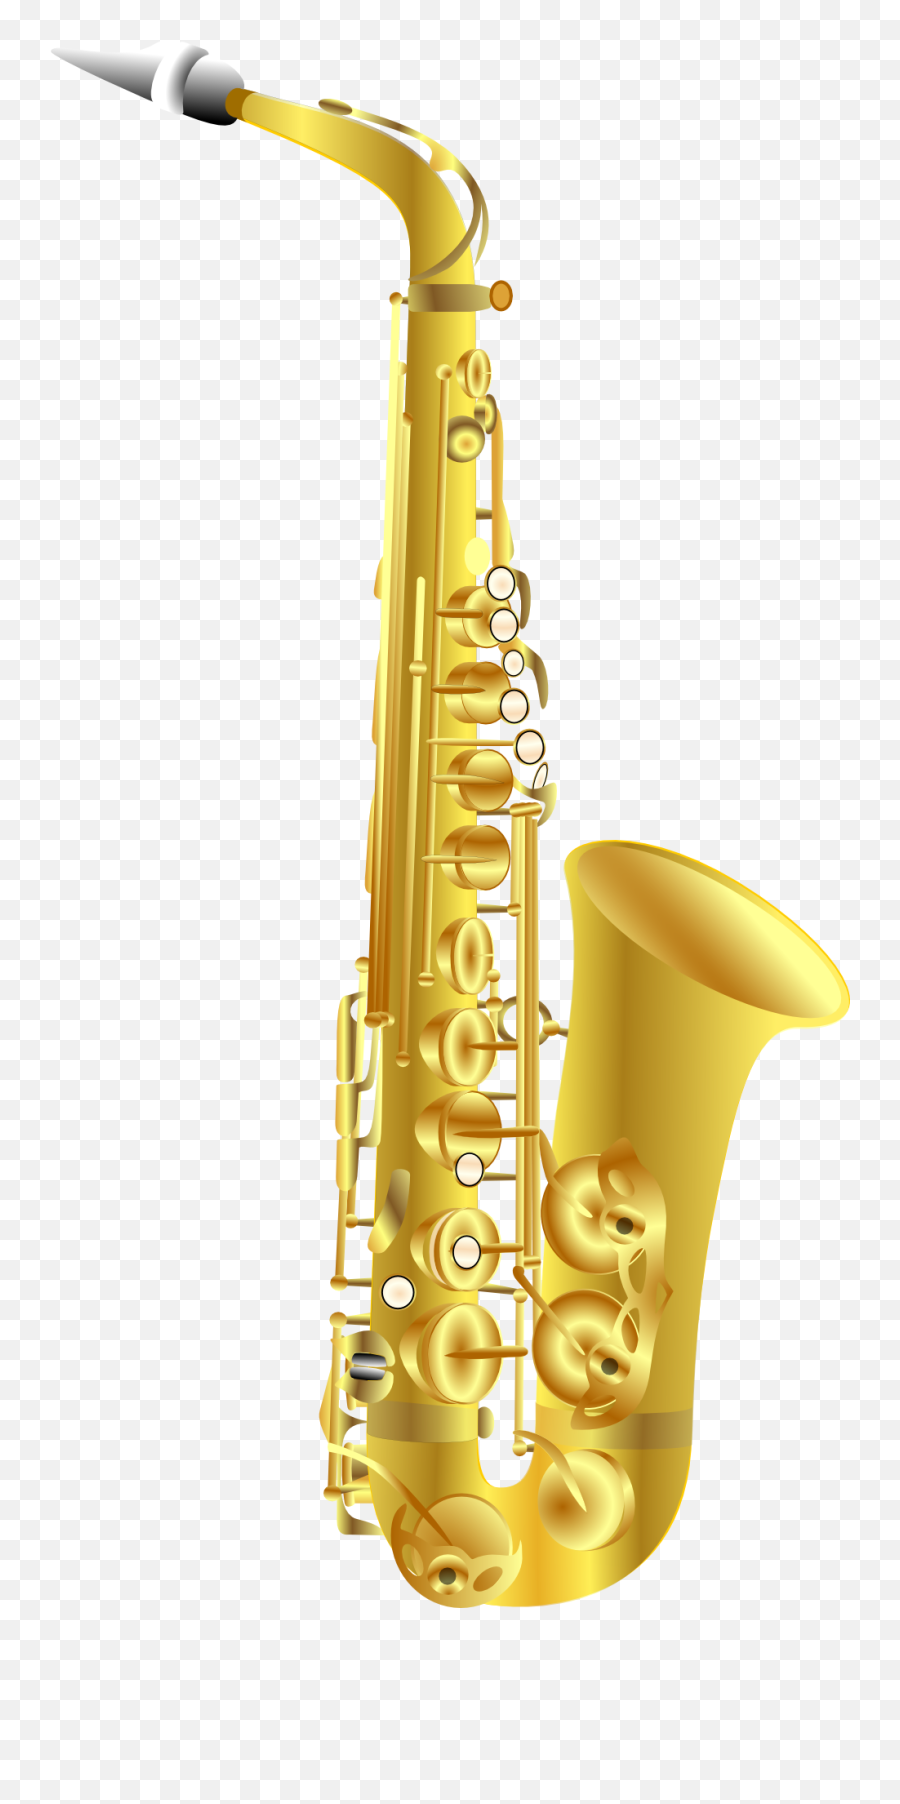 Clipart Of The Saxophone Free Image Download Emoji,Saxophone Clipart Black And White